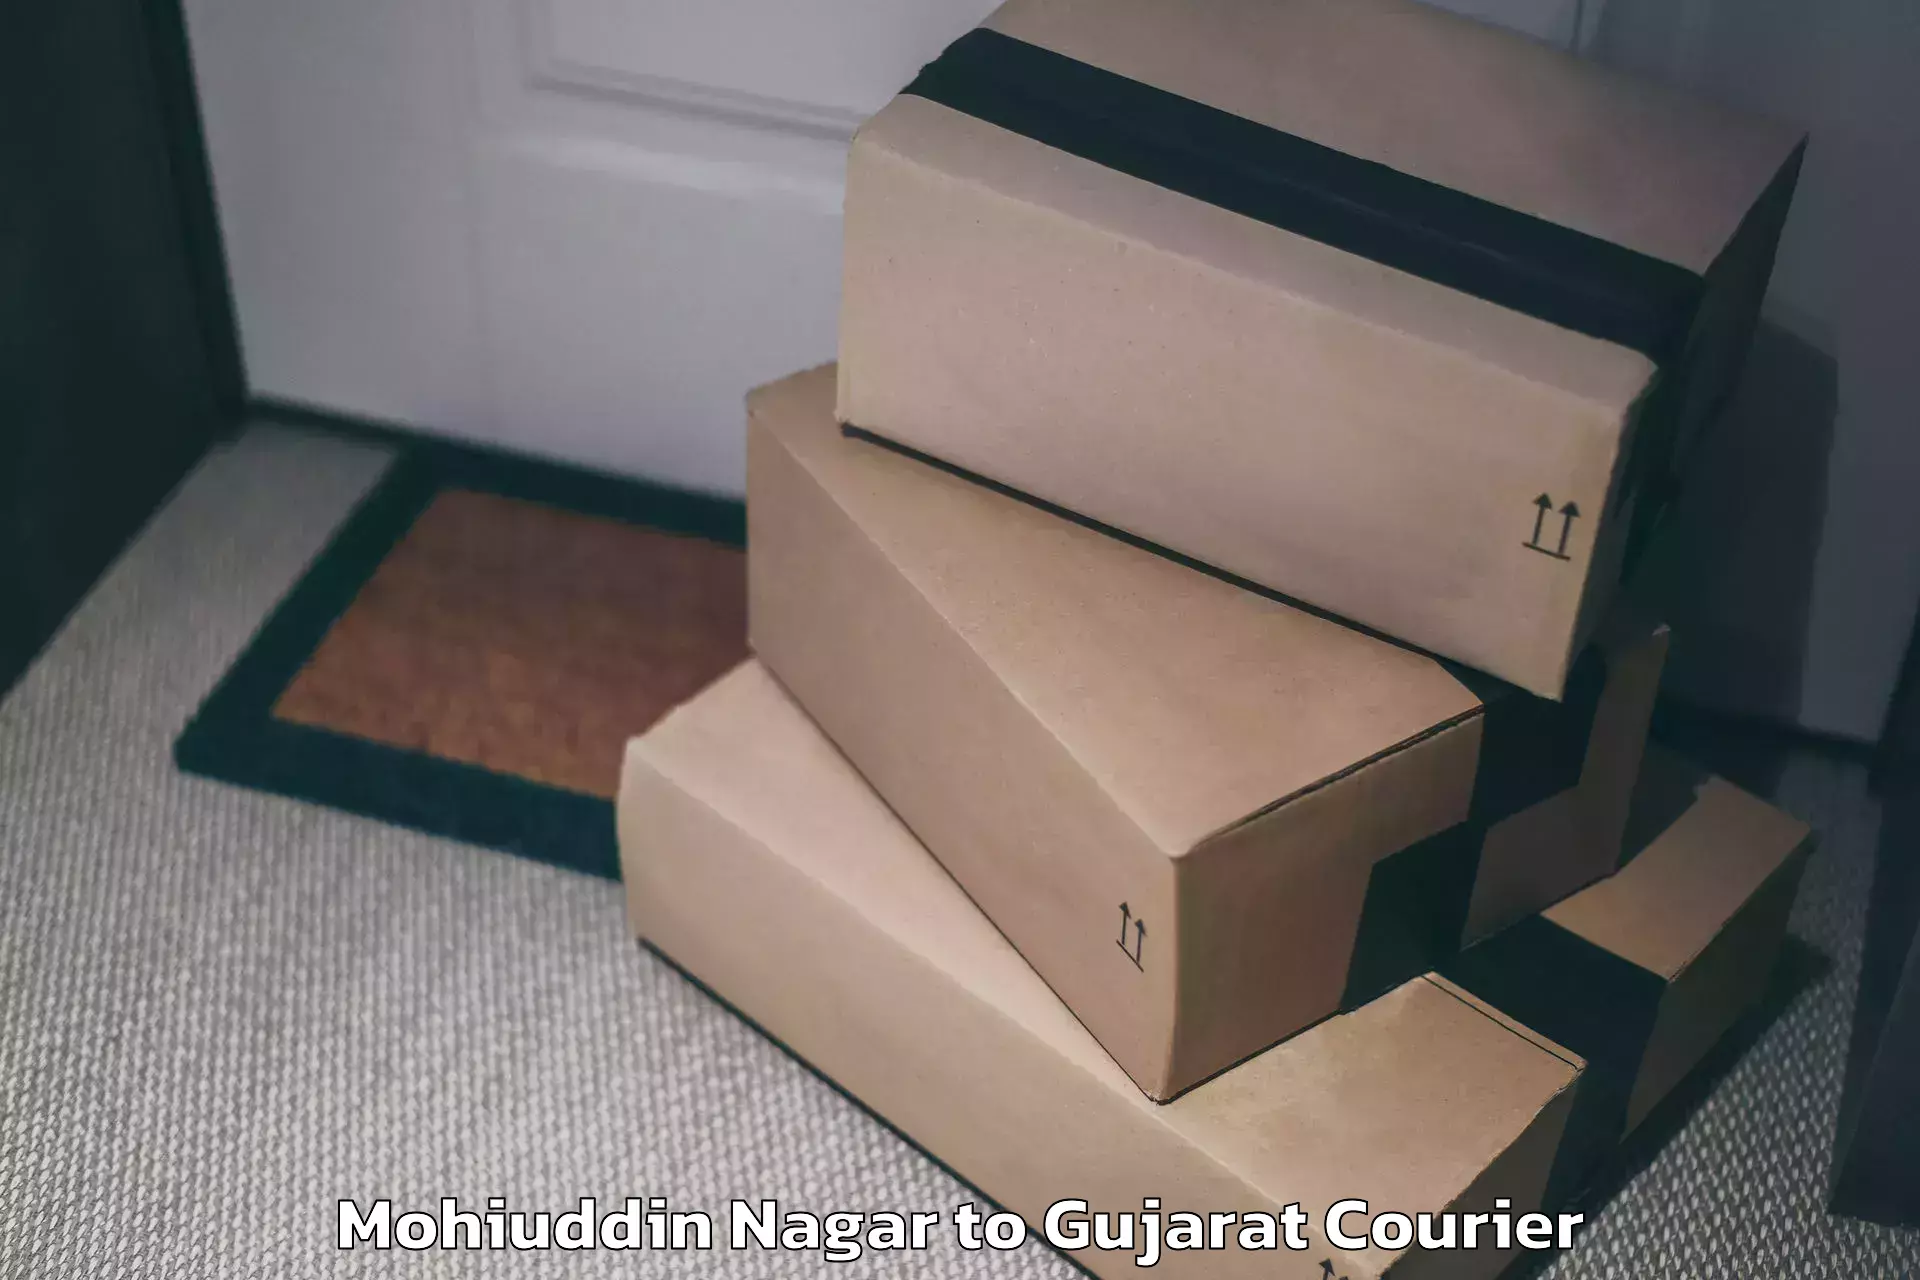 Luggage delivery system Mohiuddin Nagar to Gujarat